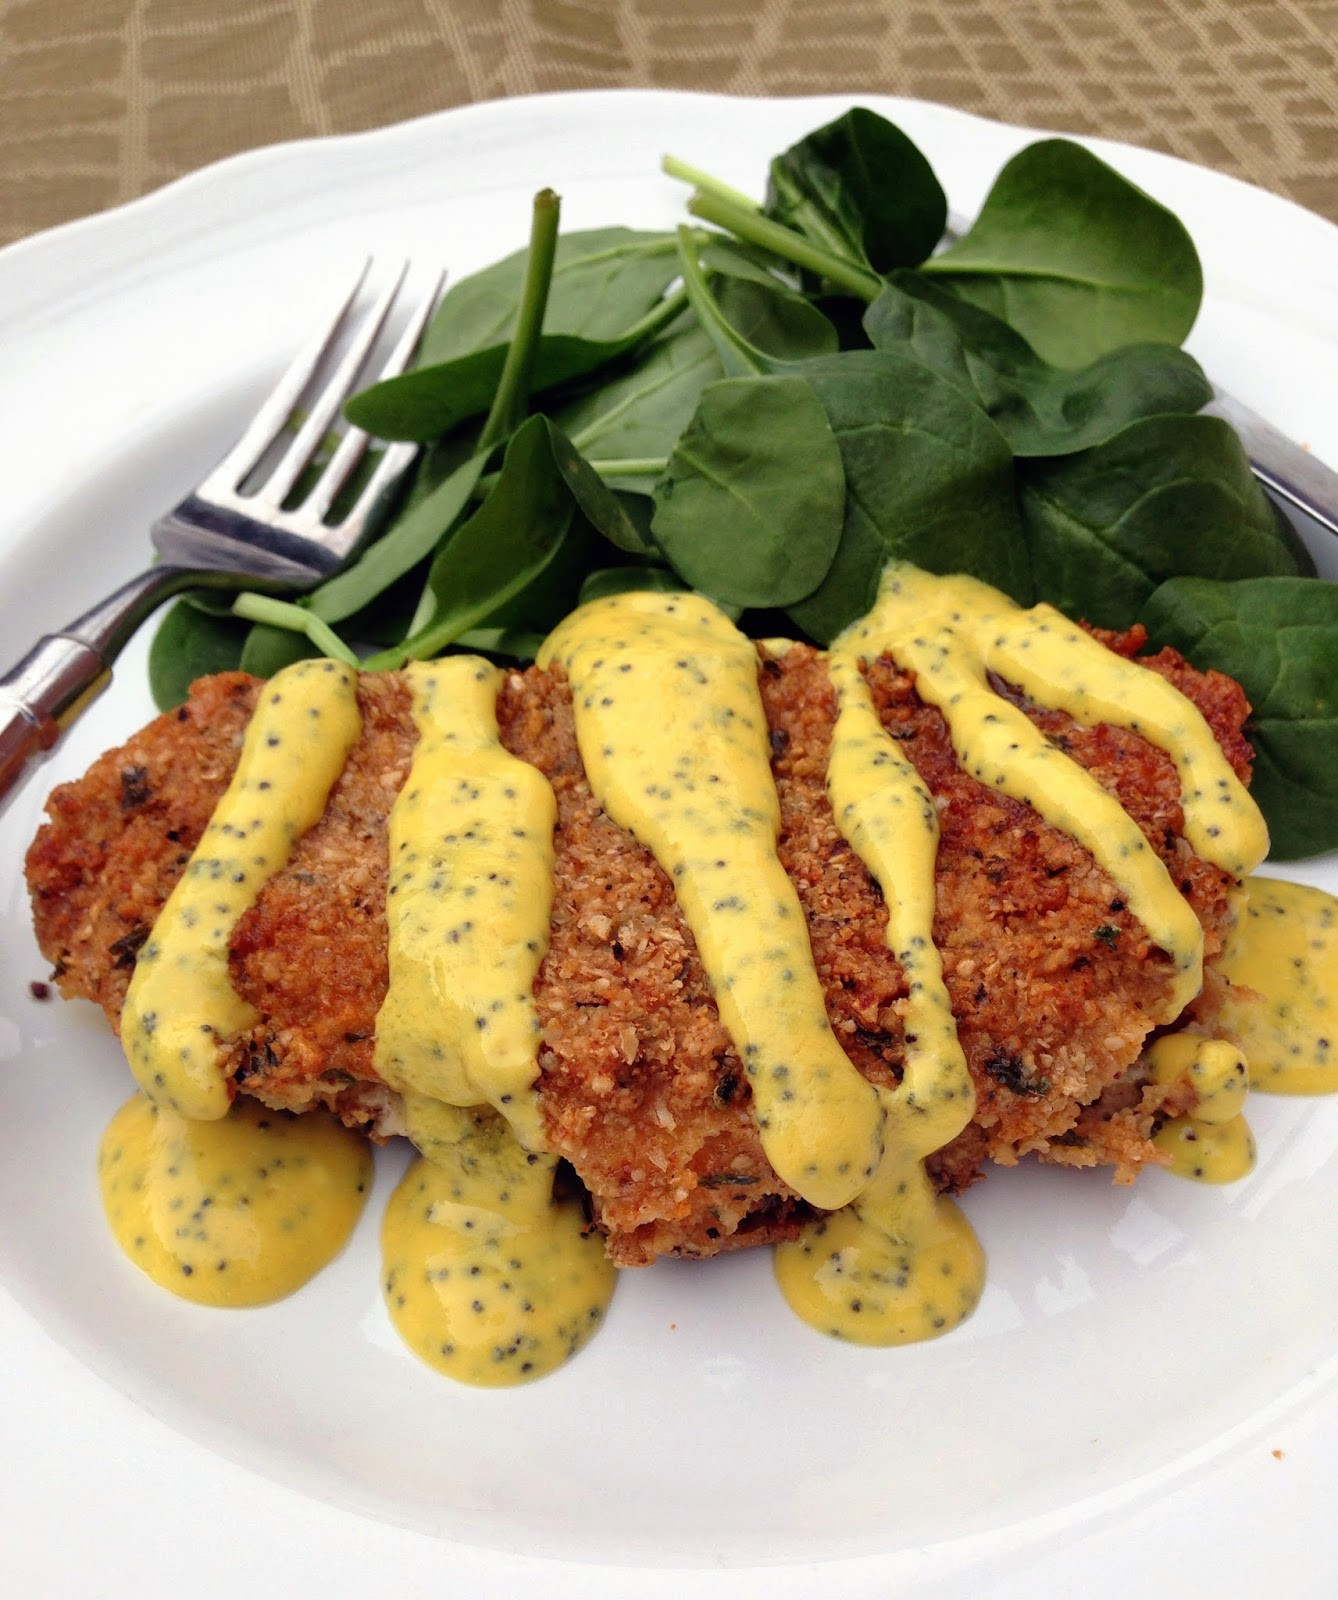 Healthy Fried Chicken
 taylor made healthy pan "fried" chicken with poppyseed